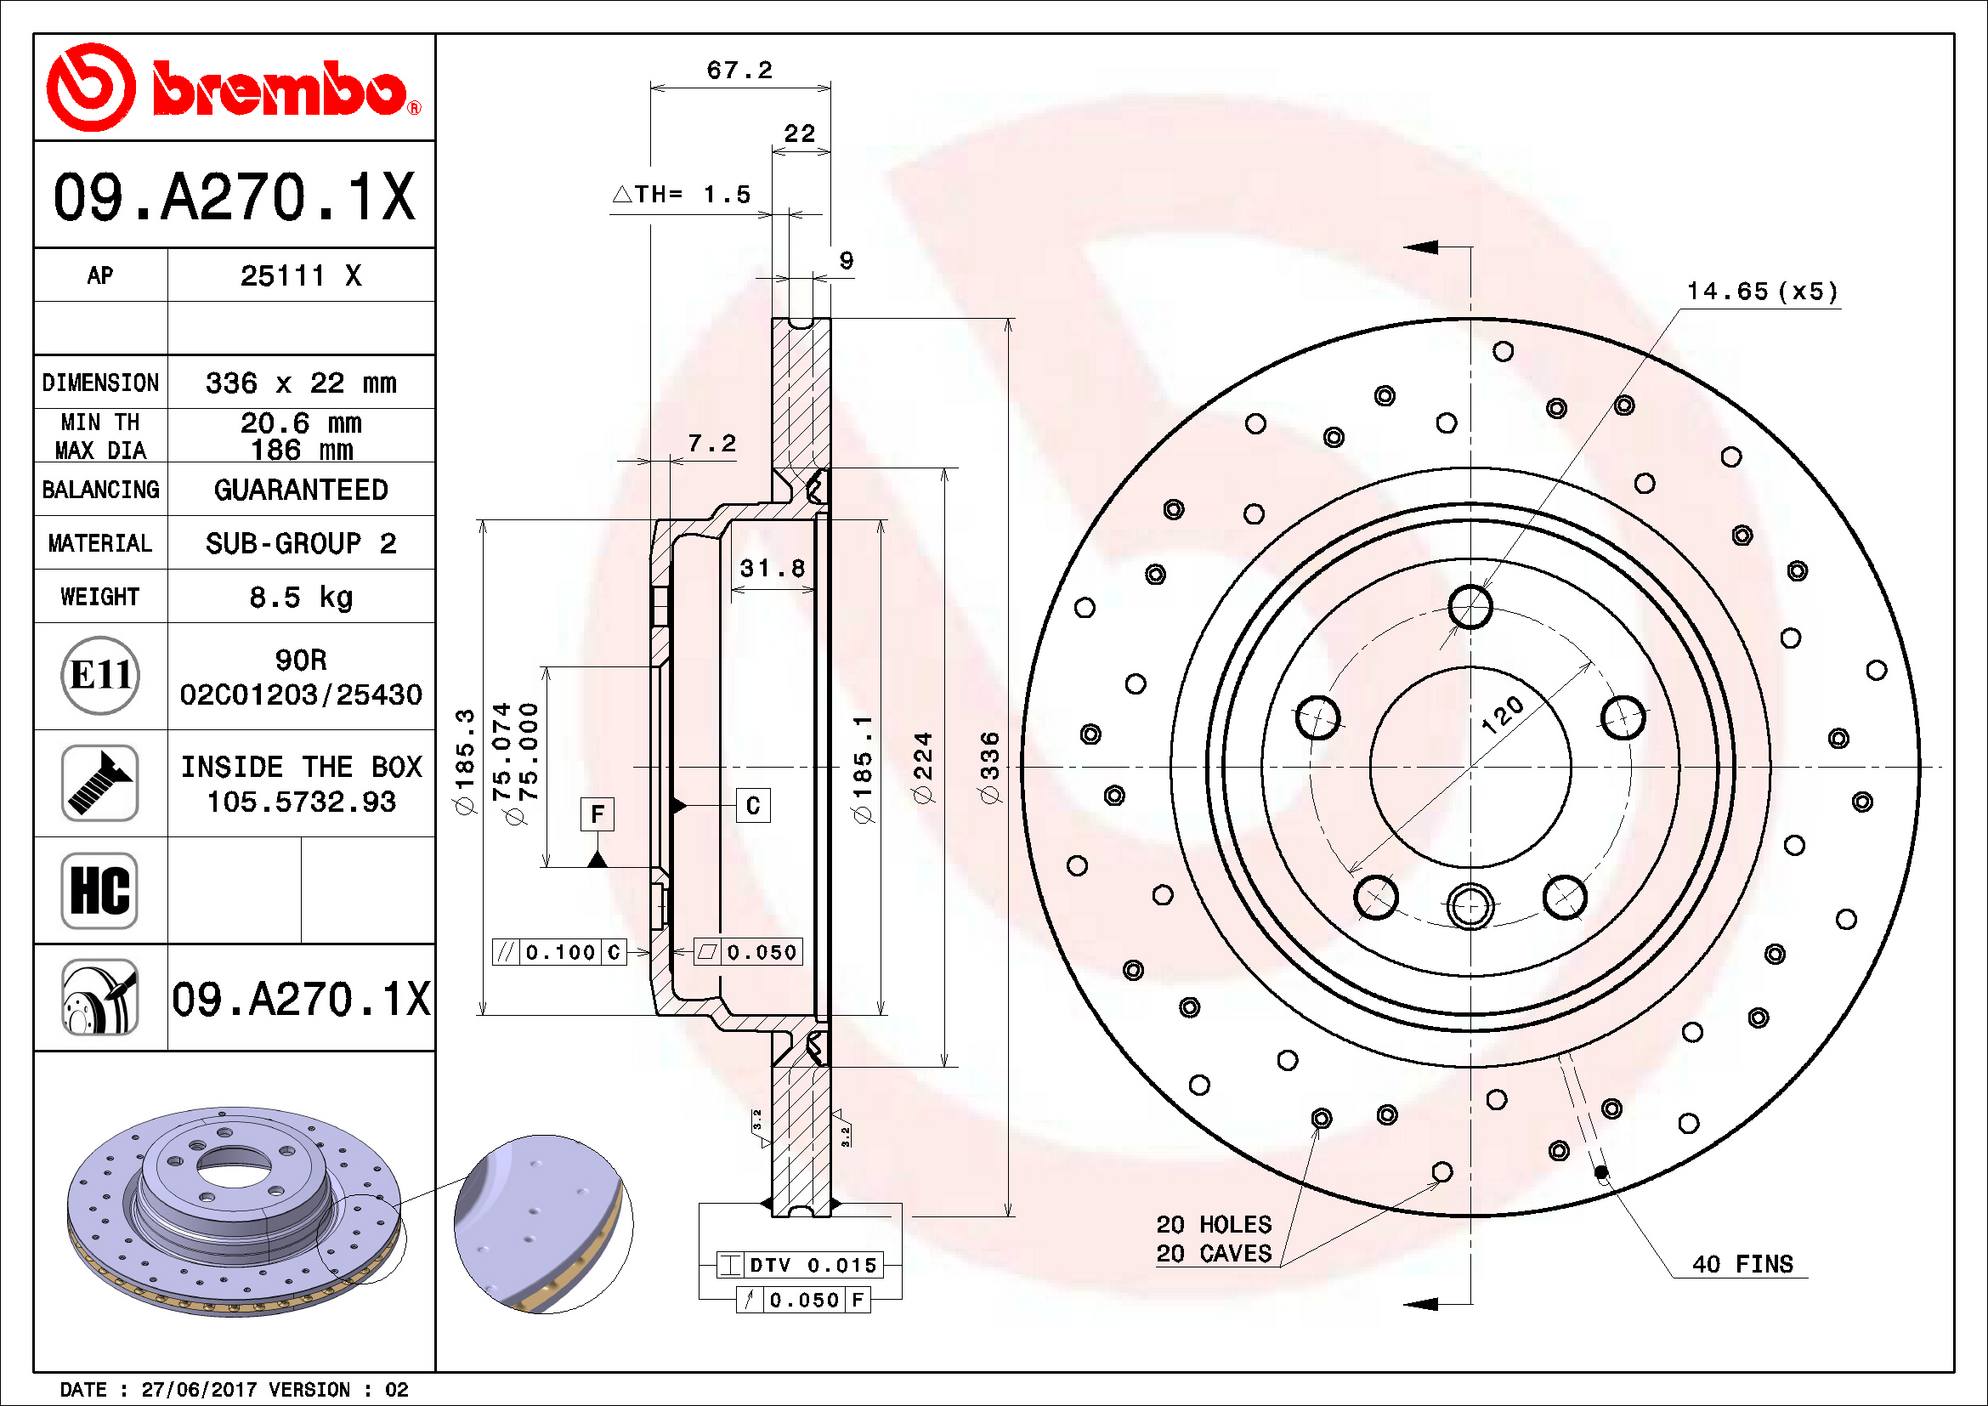 BMW Disc Brake Pad and Rotor Kit - Rear (336mm) (Low-Met) (Xtra) Brembo